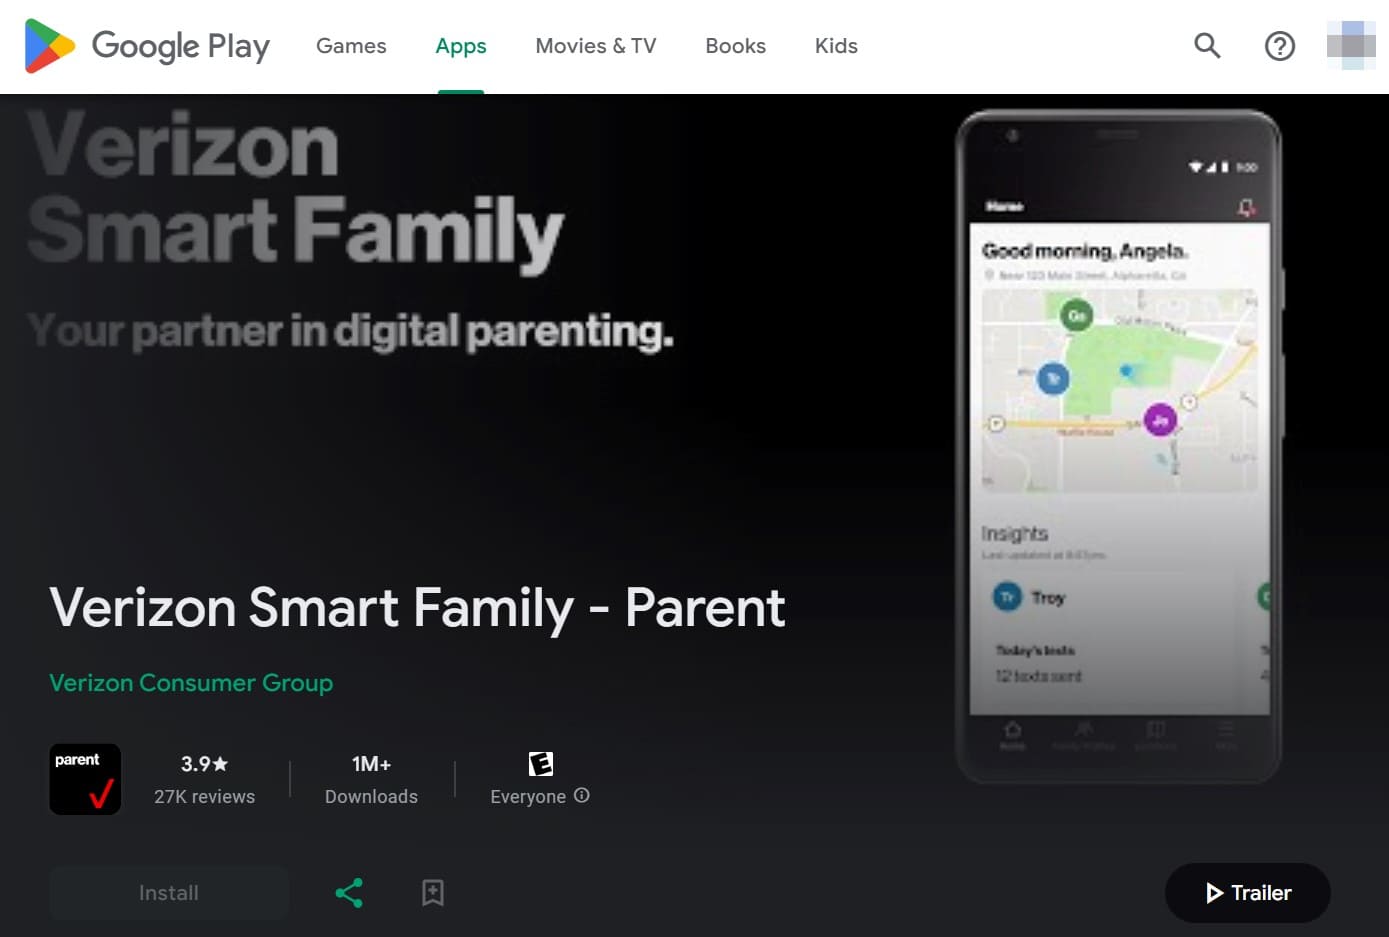 View the Verizon Smart Family app home page on Google Play with a button to install it on your phone